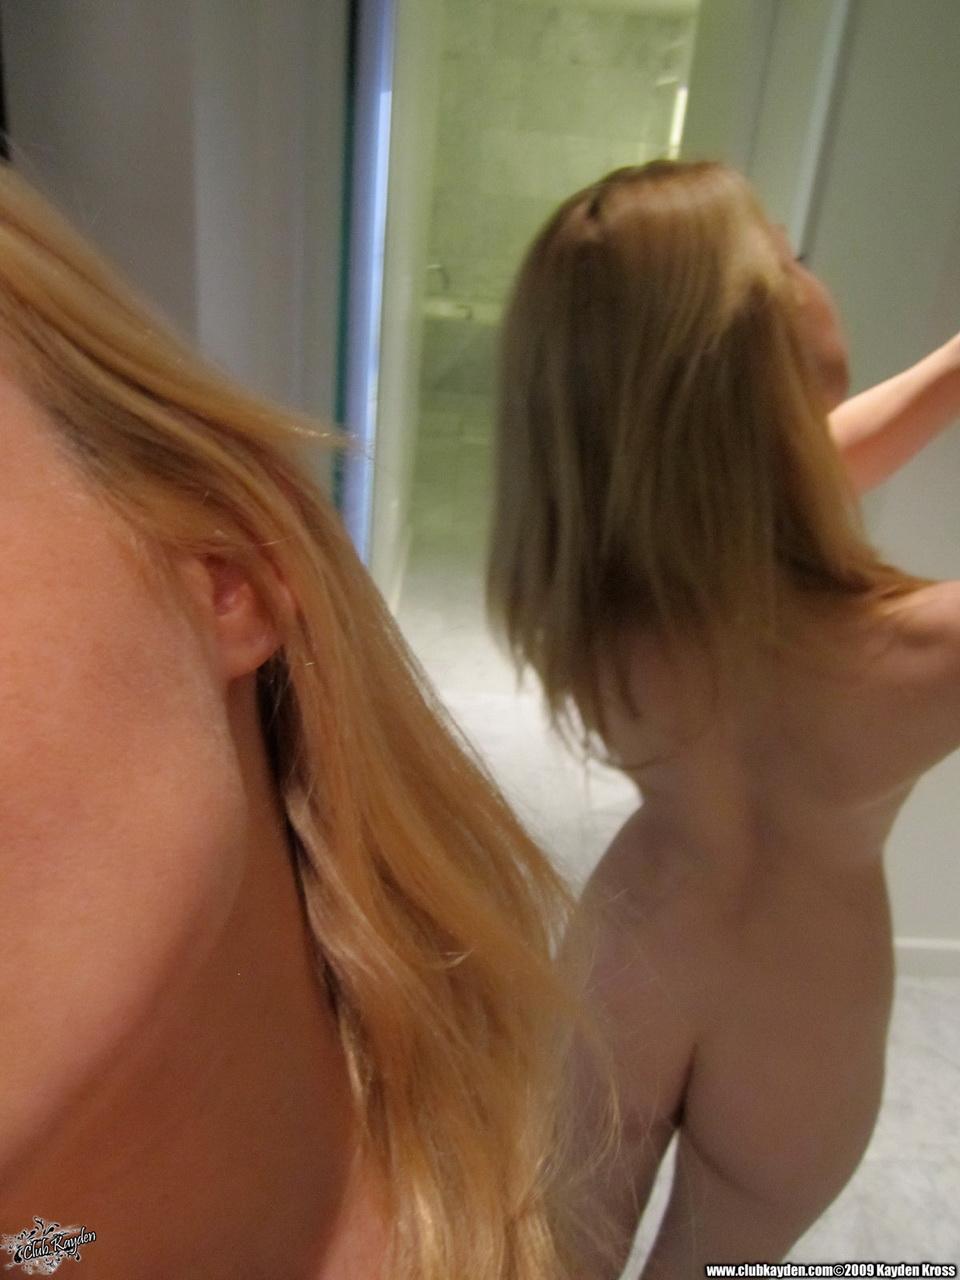 Pictures of Kayden Kross taking naughty pictures of herself in the mirror #58168820